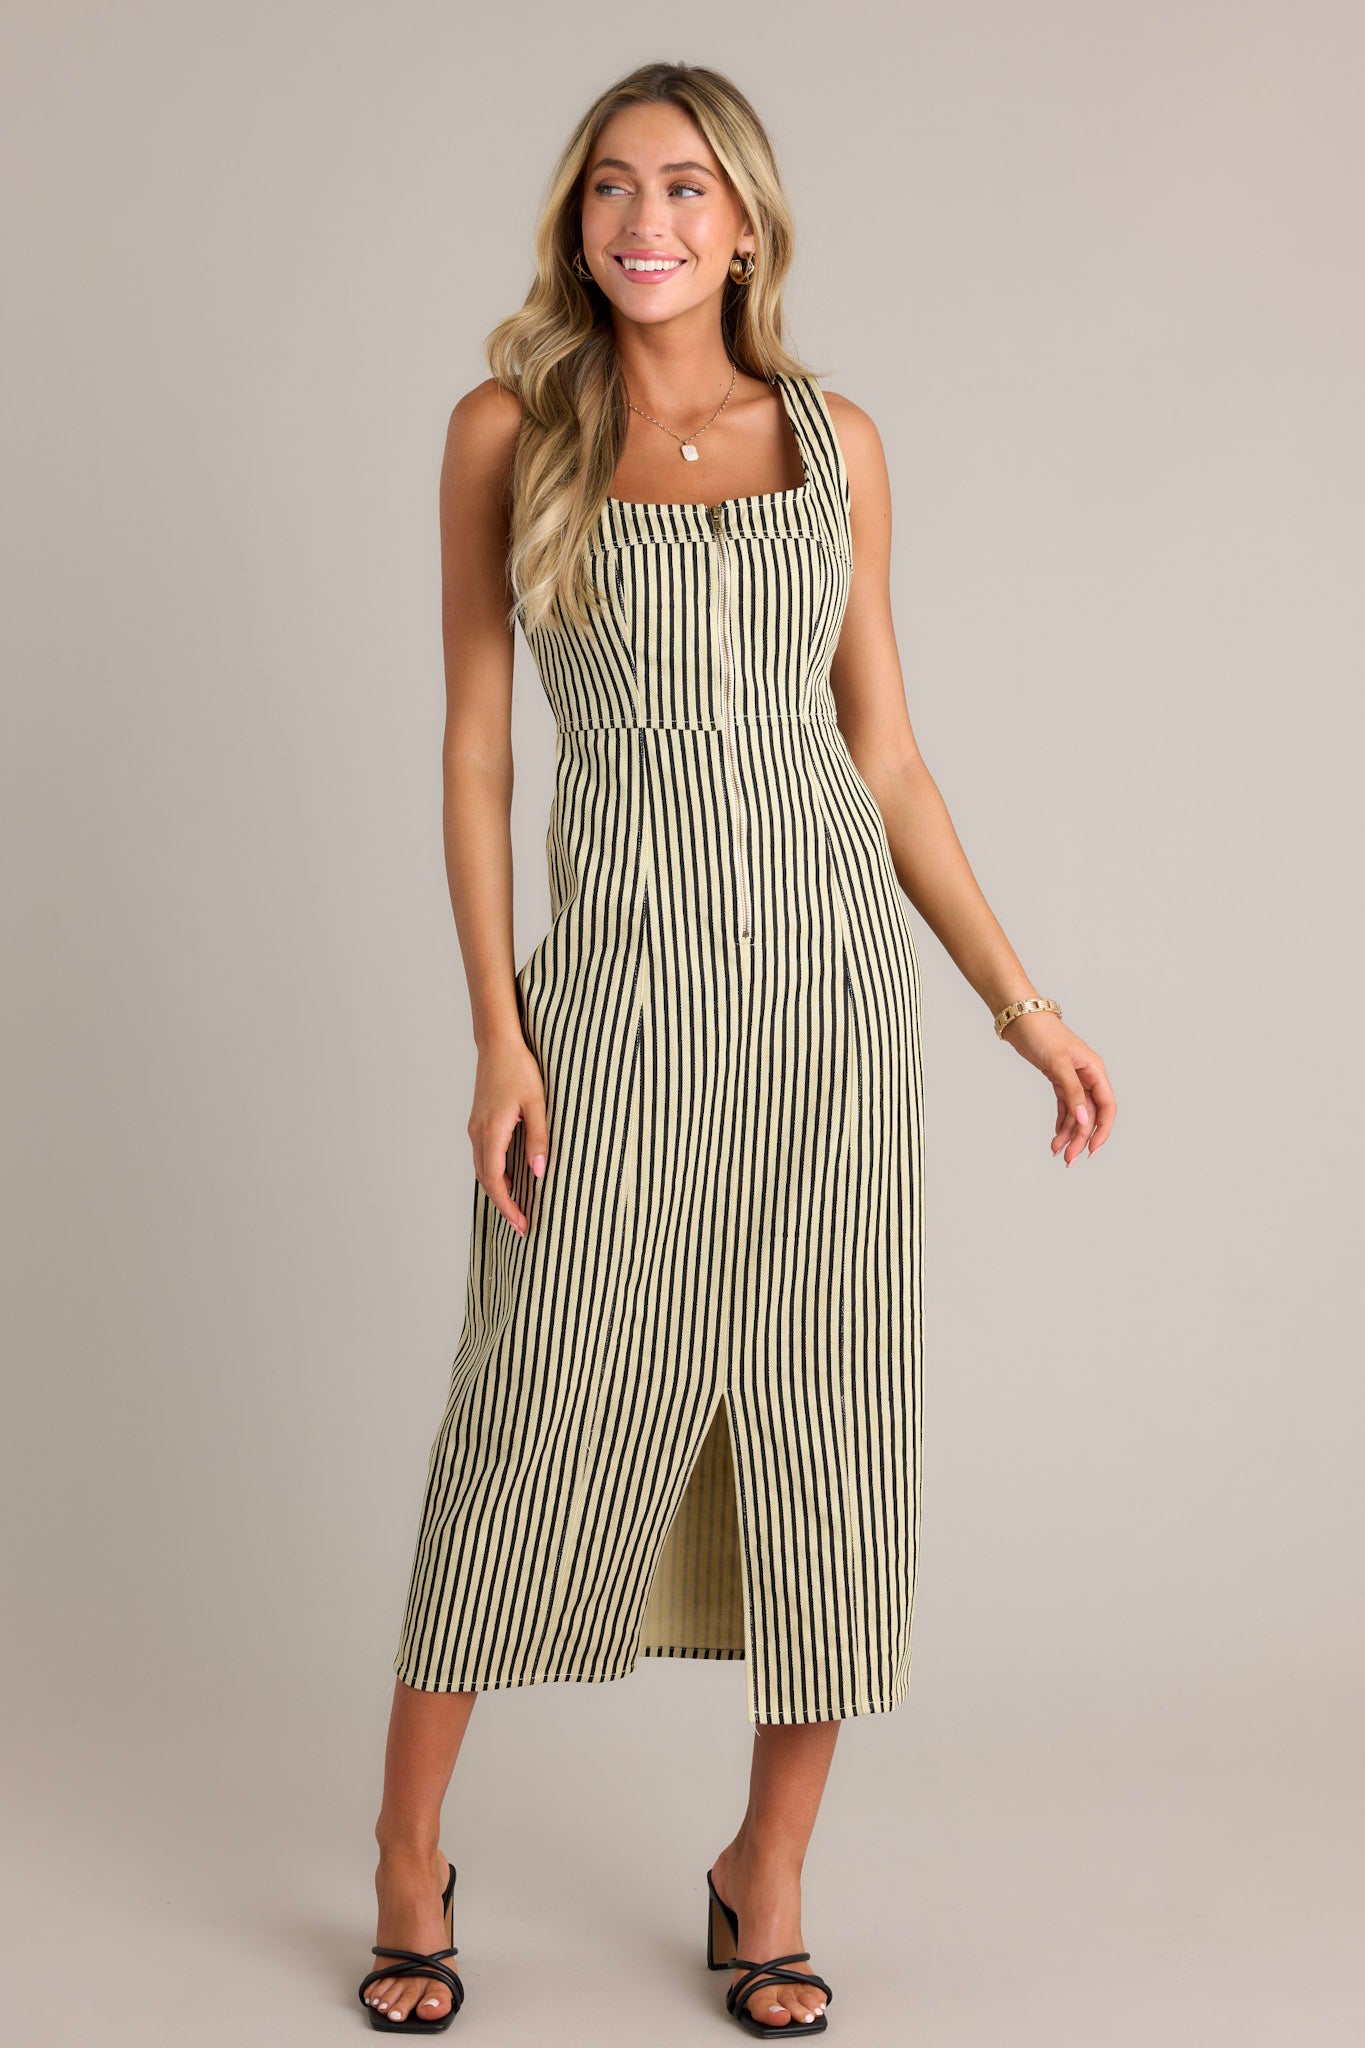 Action shot of a black stripe maxi dress displaying the fit and movement, highlighting the square neckline, thick straps, functional zip front, vertical stripe pattern, and front slit.